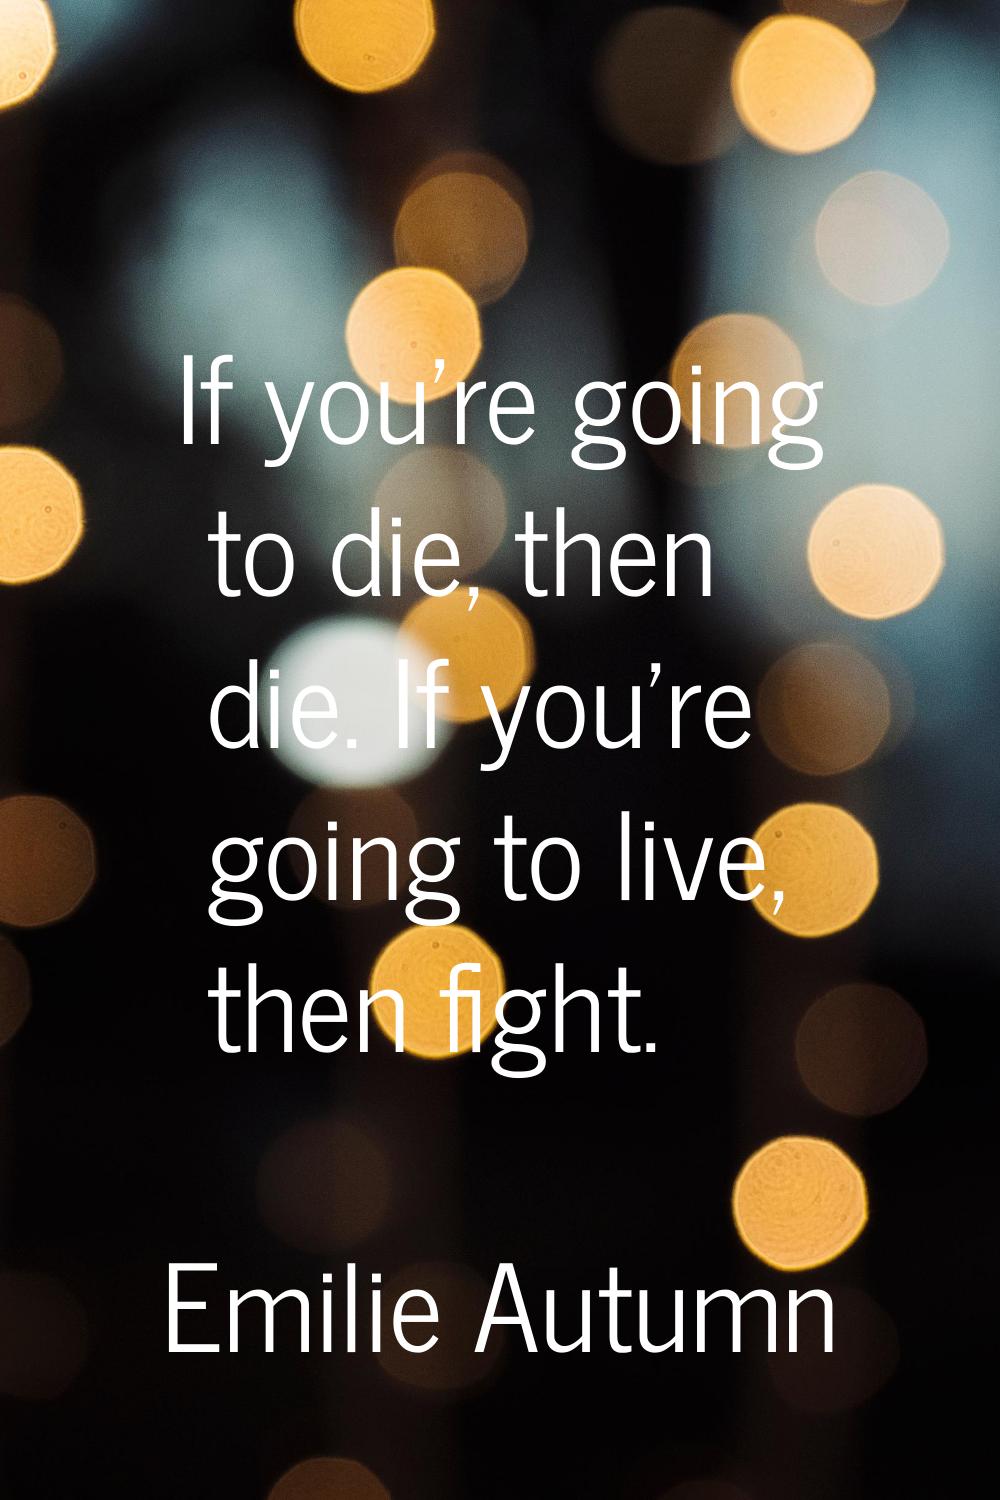 If you're going to die, then die. If you're going to live, then fight.